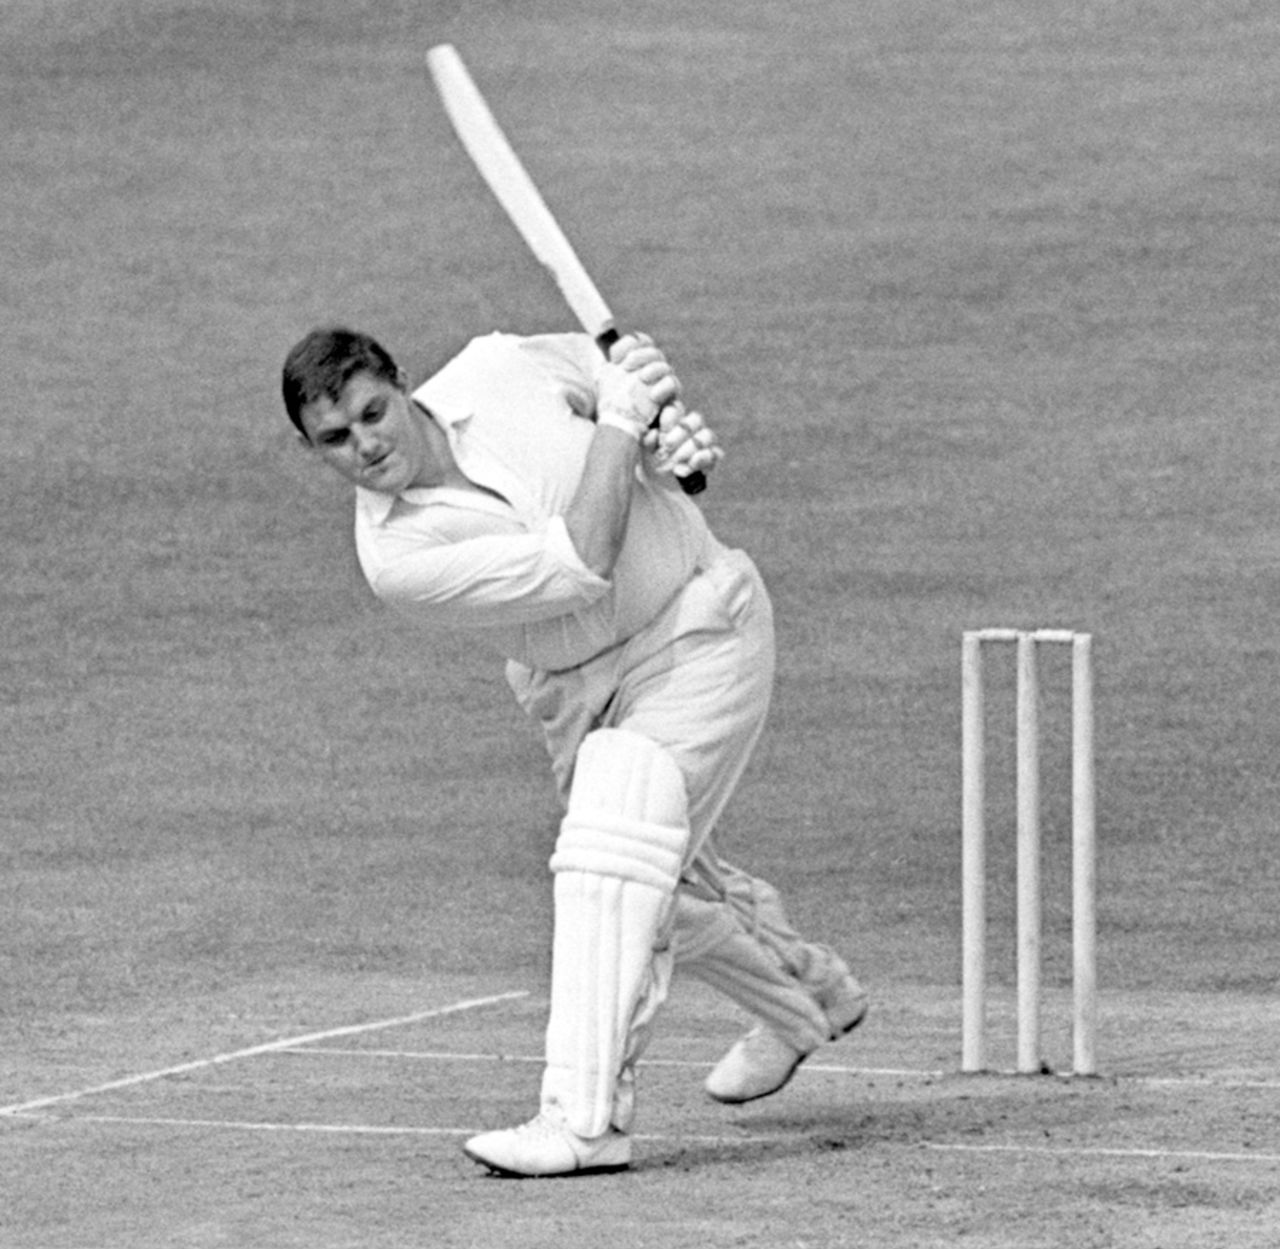 Colin Milburn's match-winning 84 took Northamptonshire to the semi-finals, Middlesex v Northamptonshire, quarter-final, Gillette Cup, Lord's, June 12, 1963